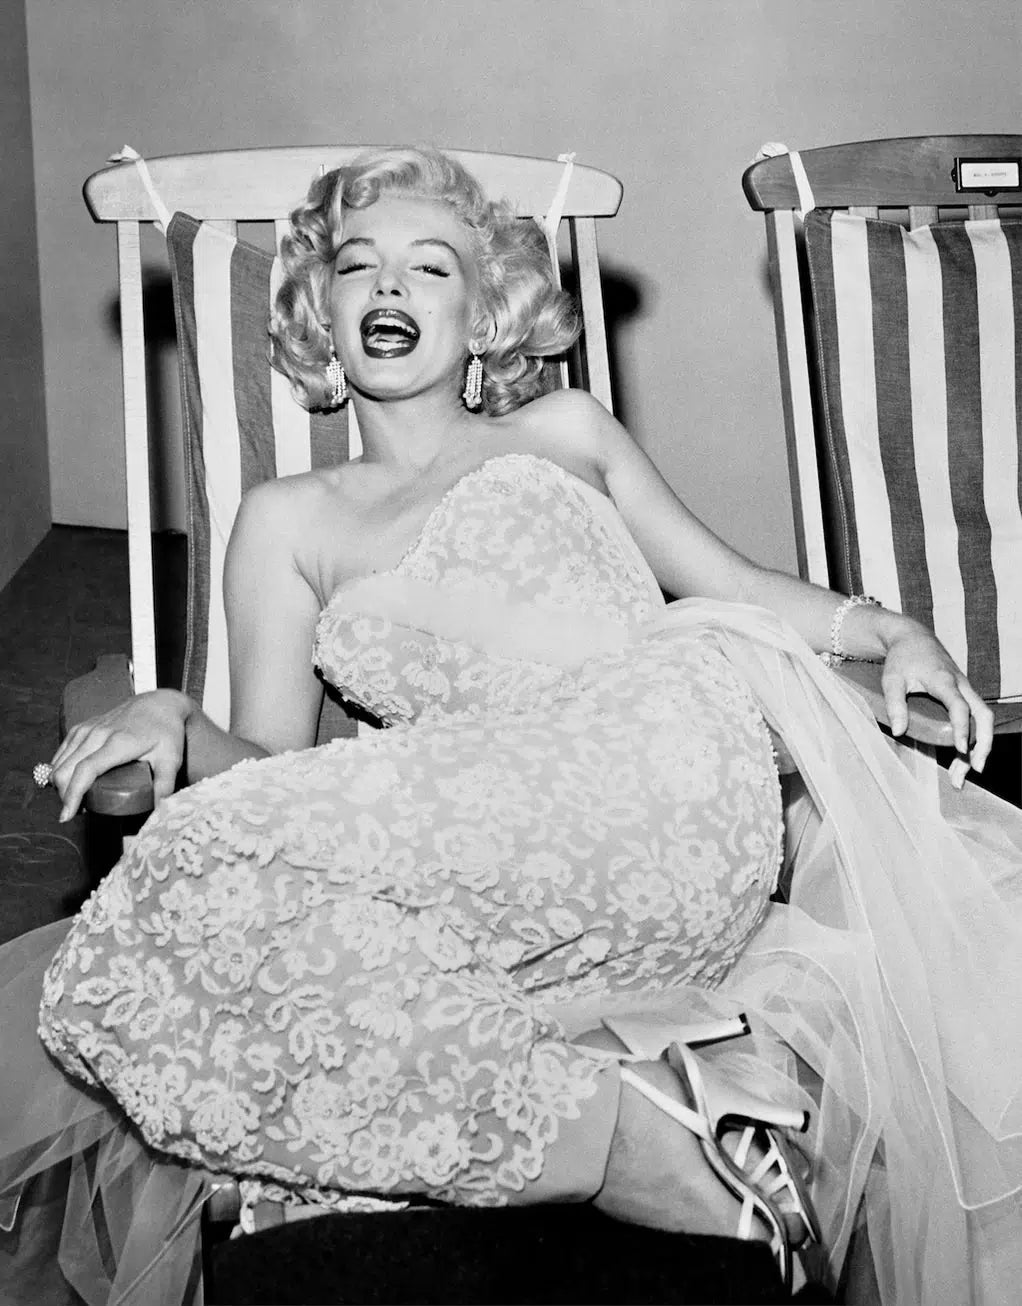 Marilyn Monroe in Deckchair (b&w), from The Wild Ones collection-PurePhoto